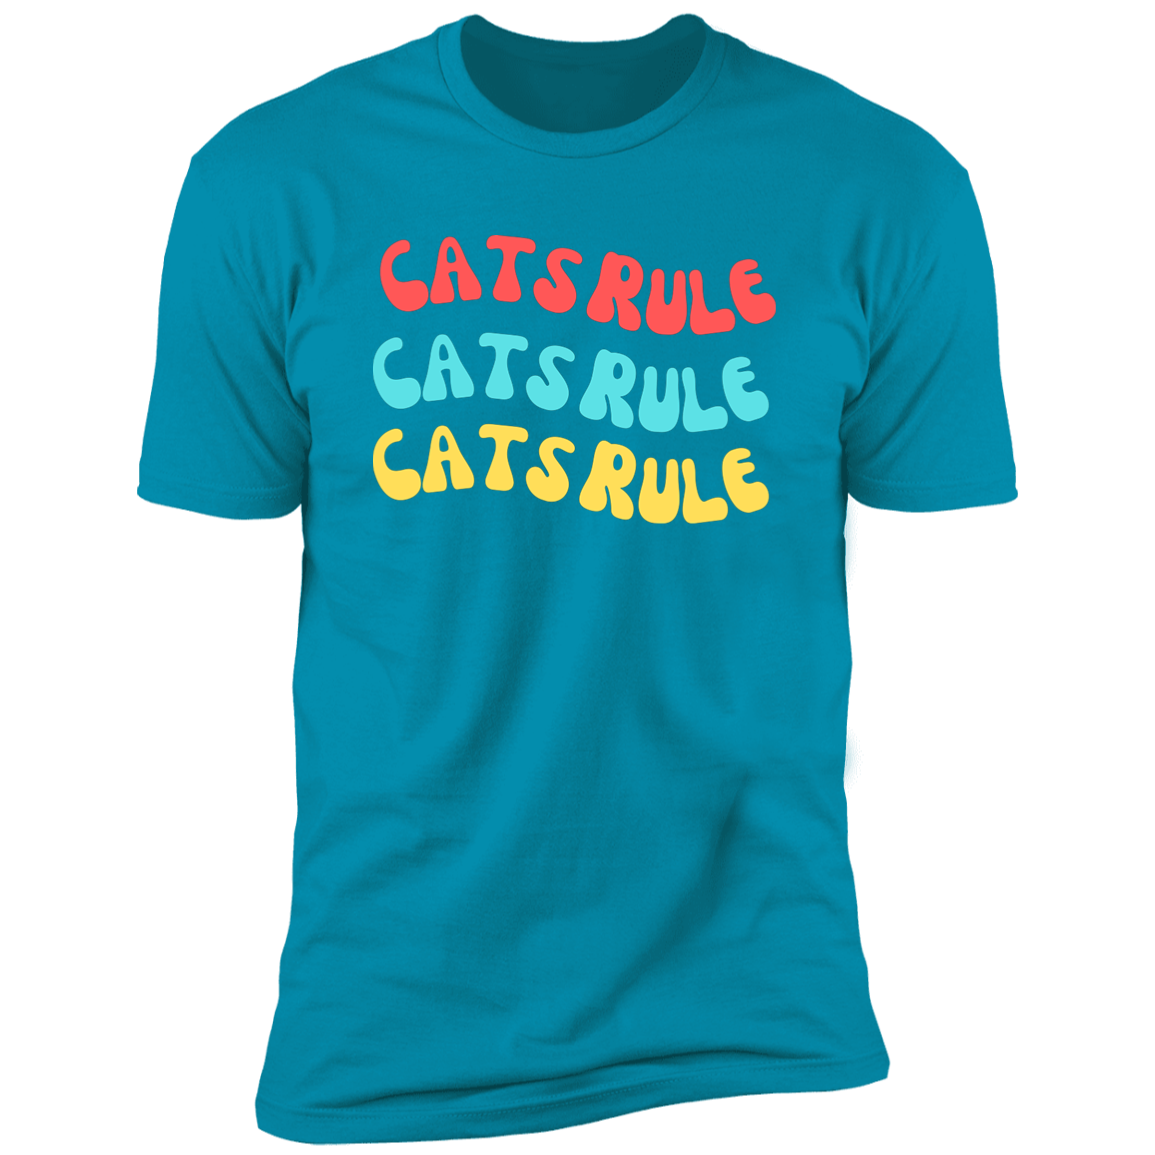 Cats Rule T-shirt, Cat Shirt for humans, in turquoise